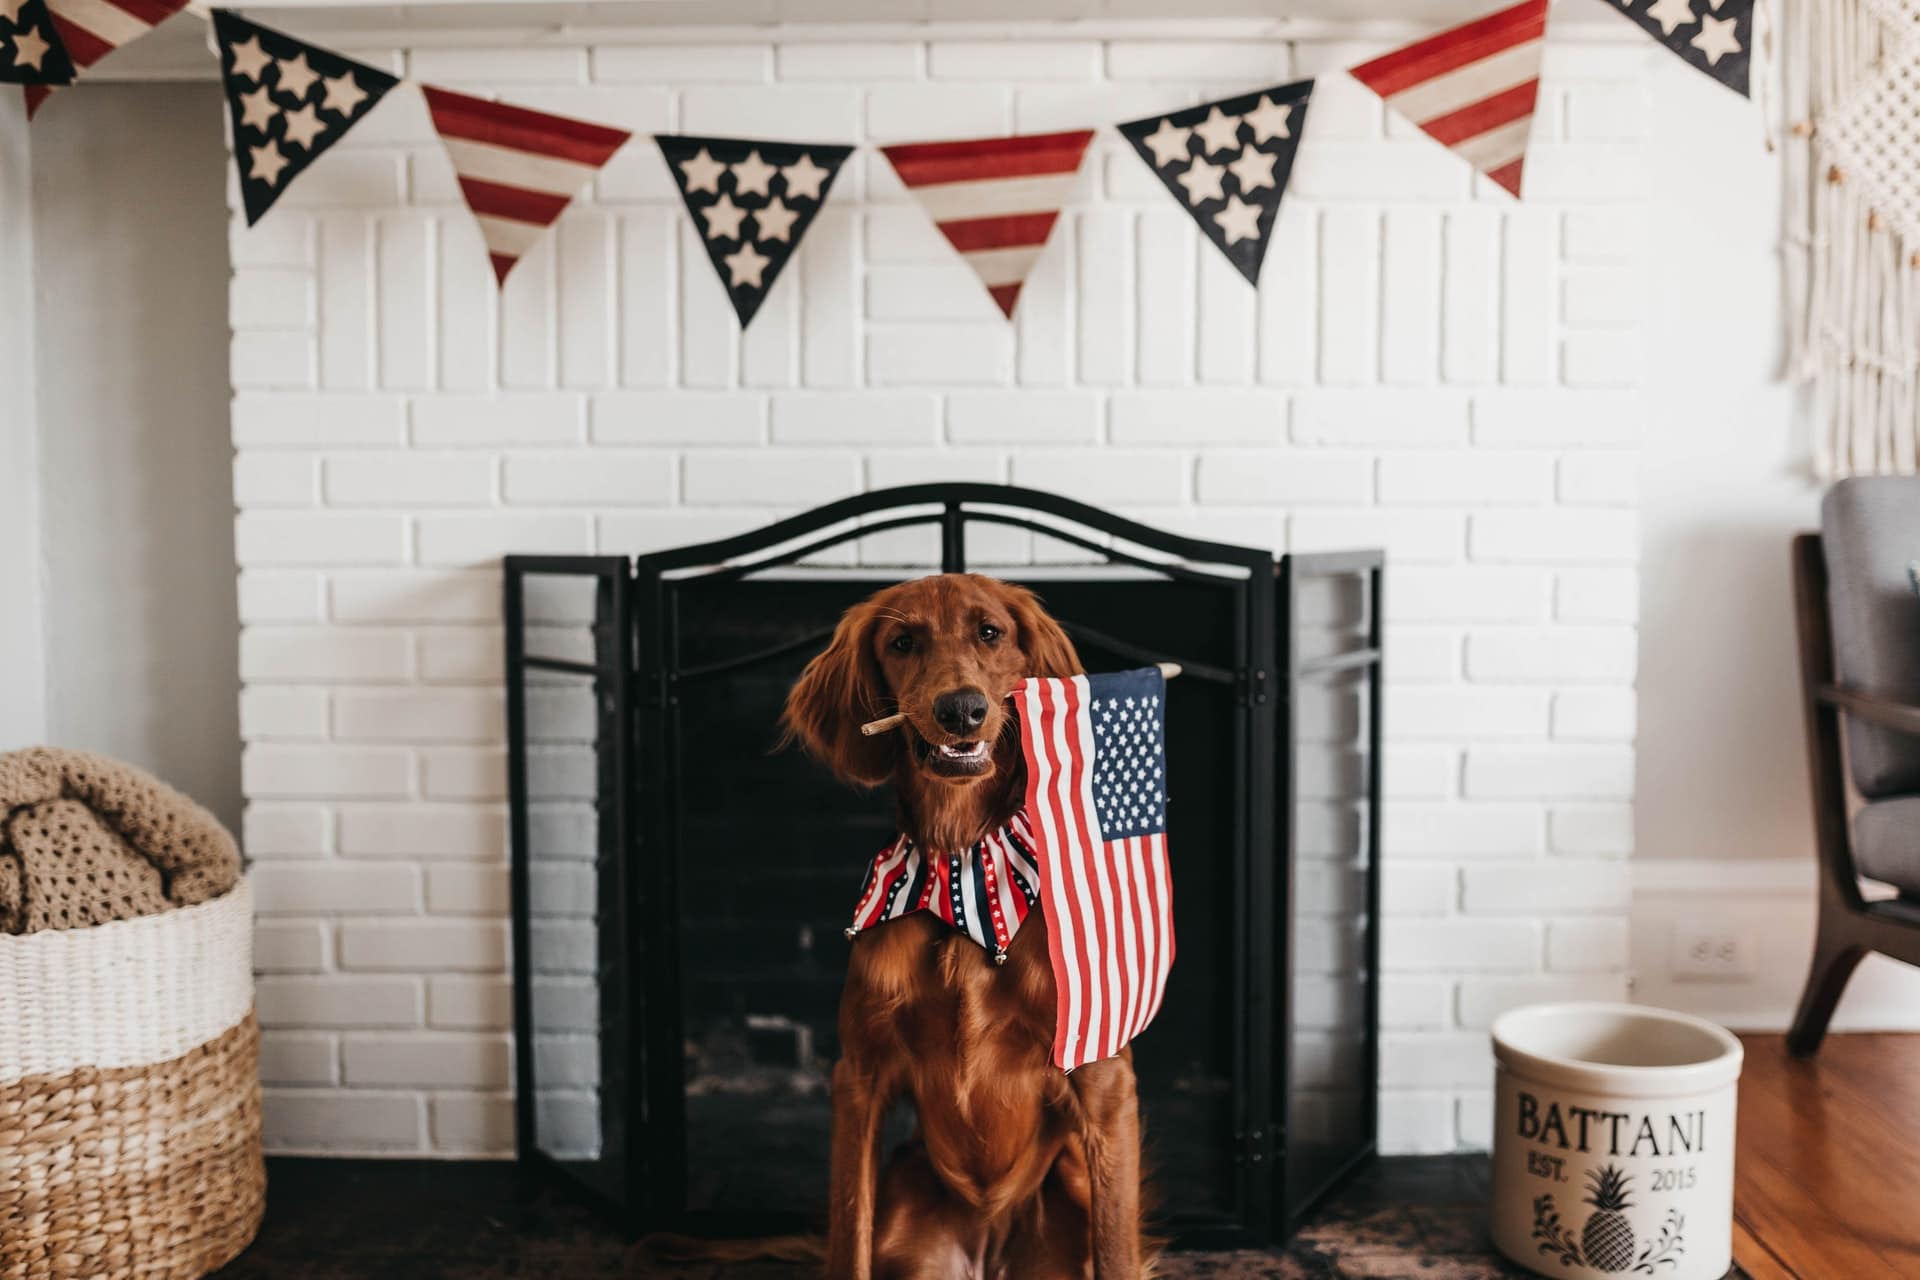 How To Keep Your Home, Family, and Guests Safe This 4th of July